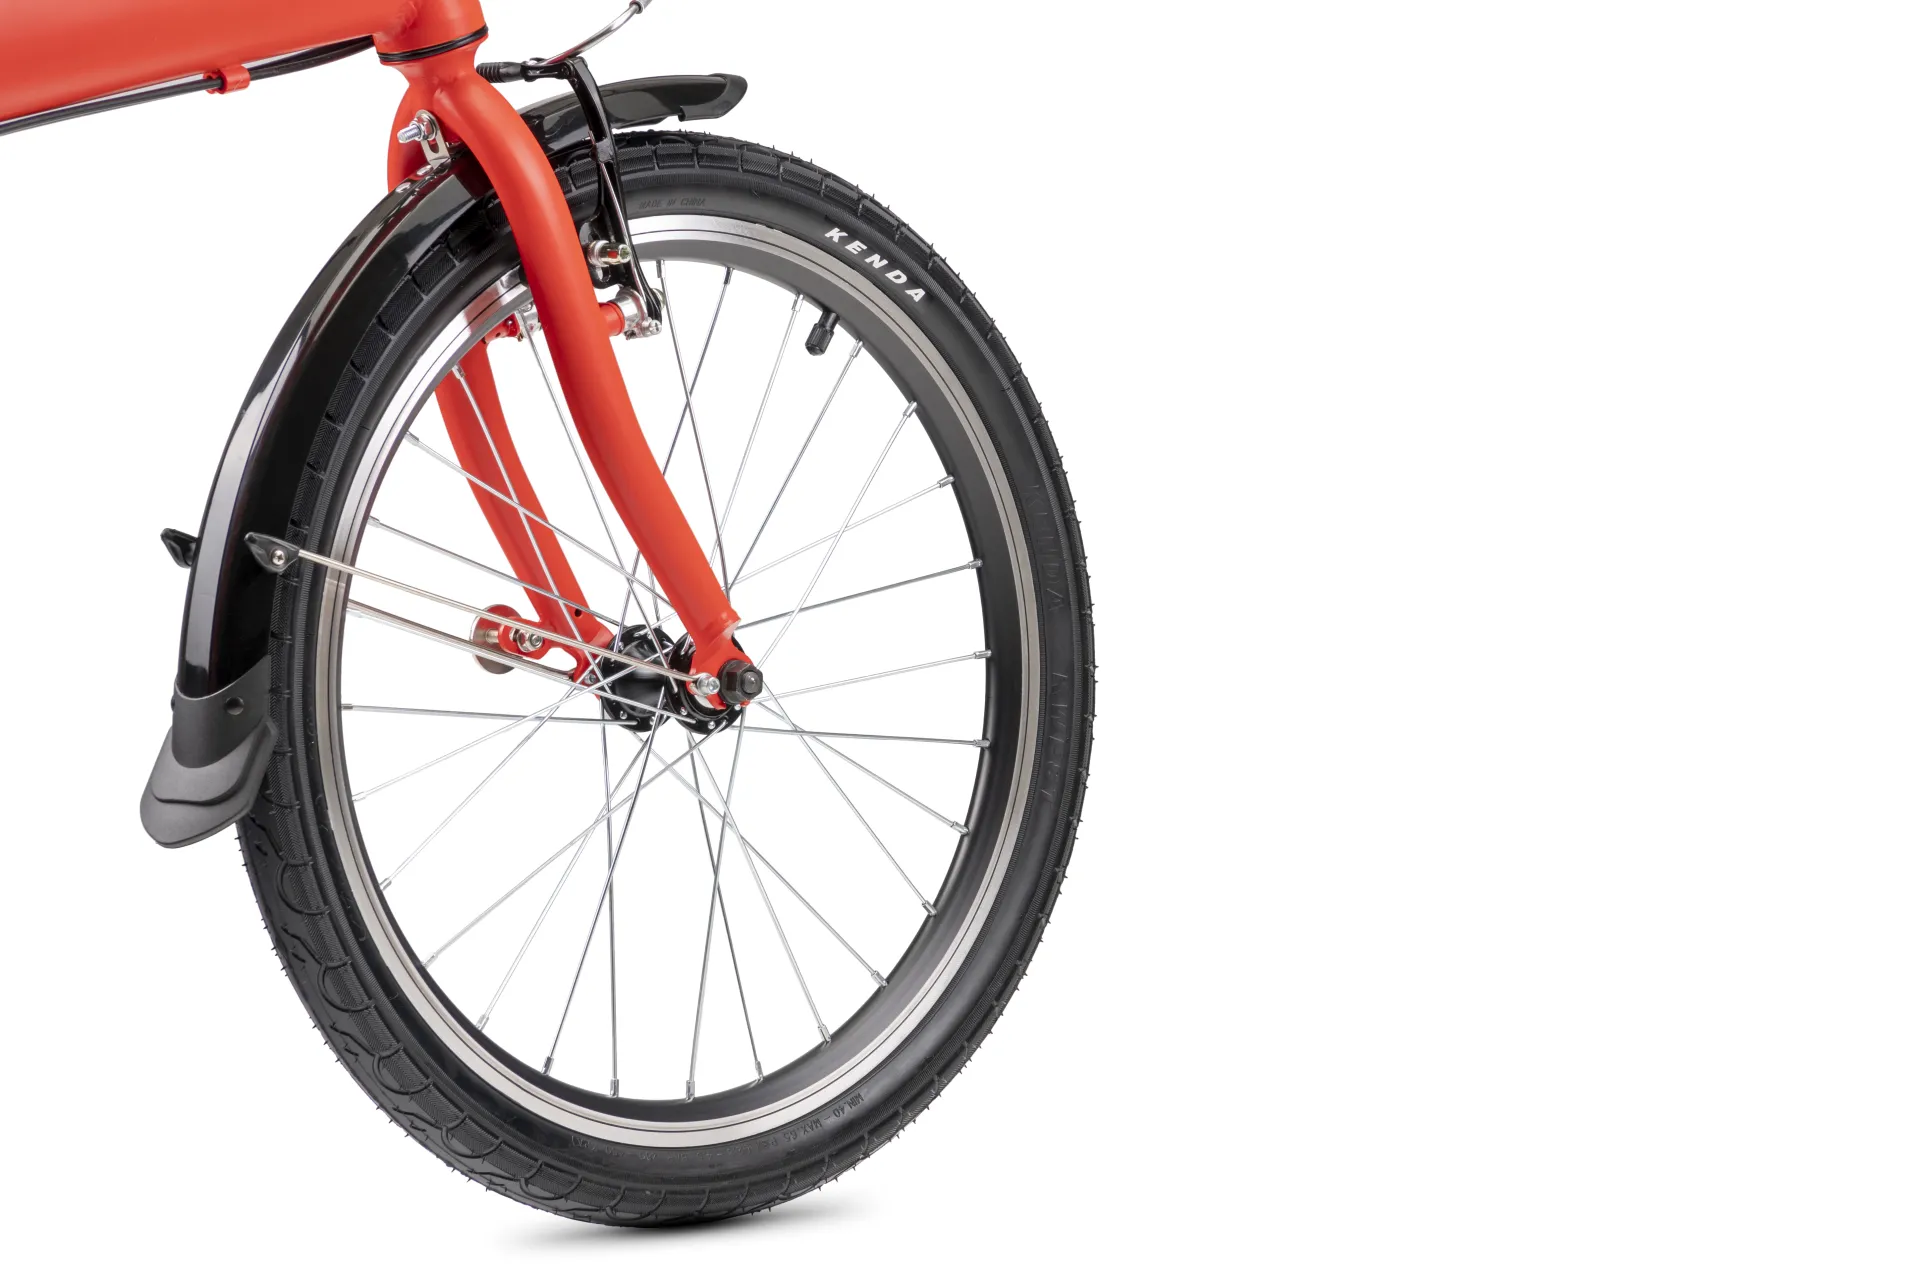 Link A7 | Tern Bicycles